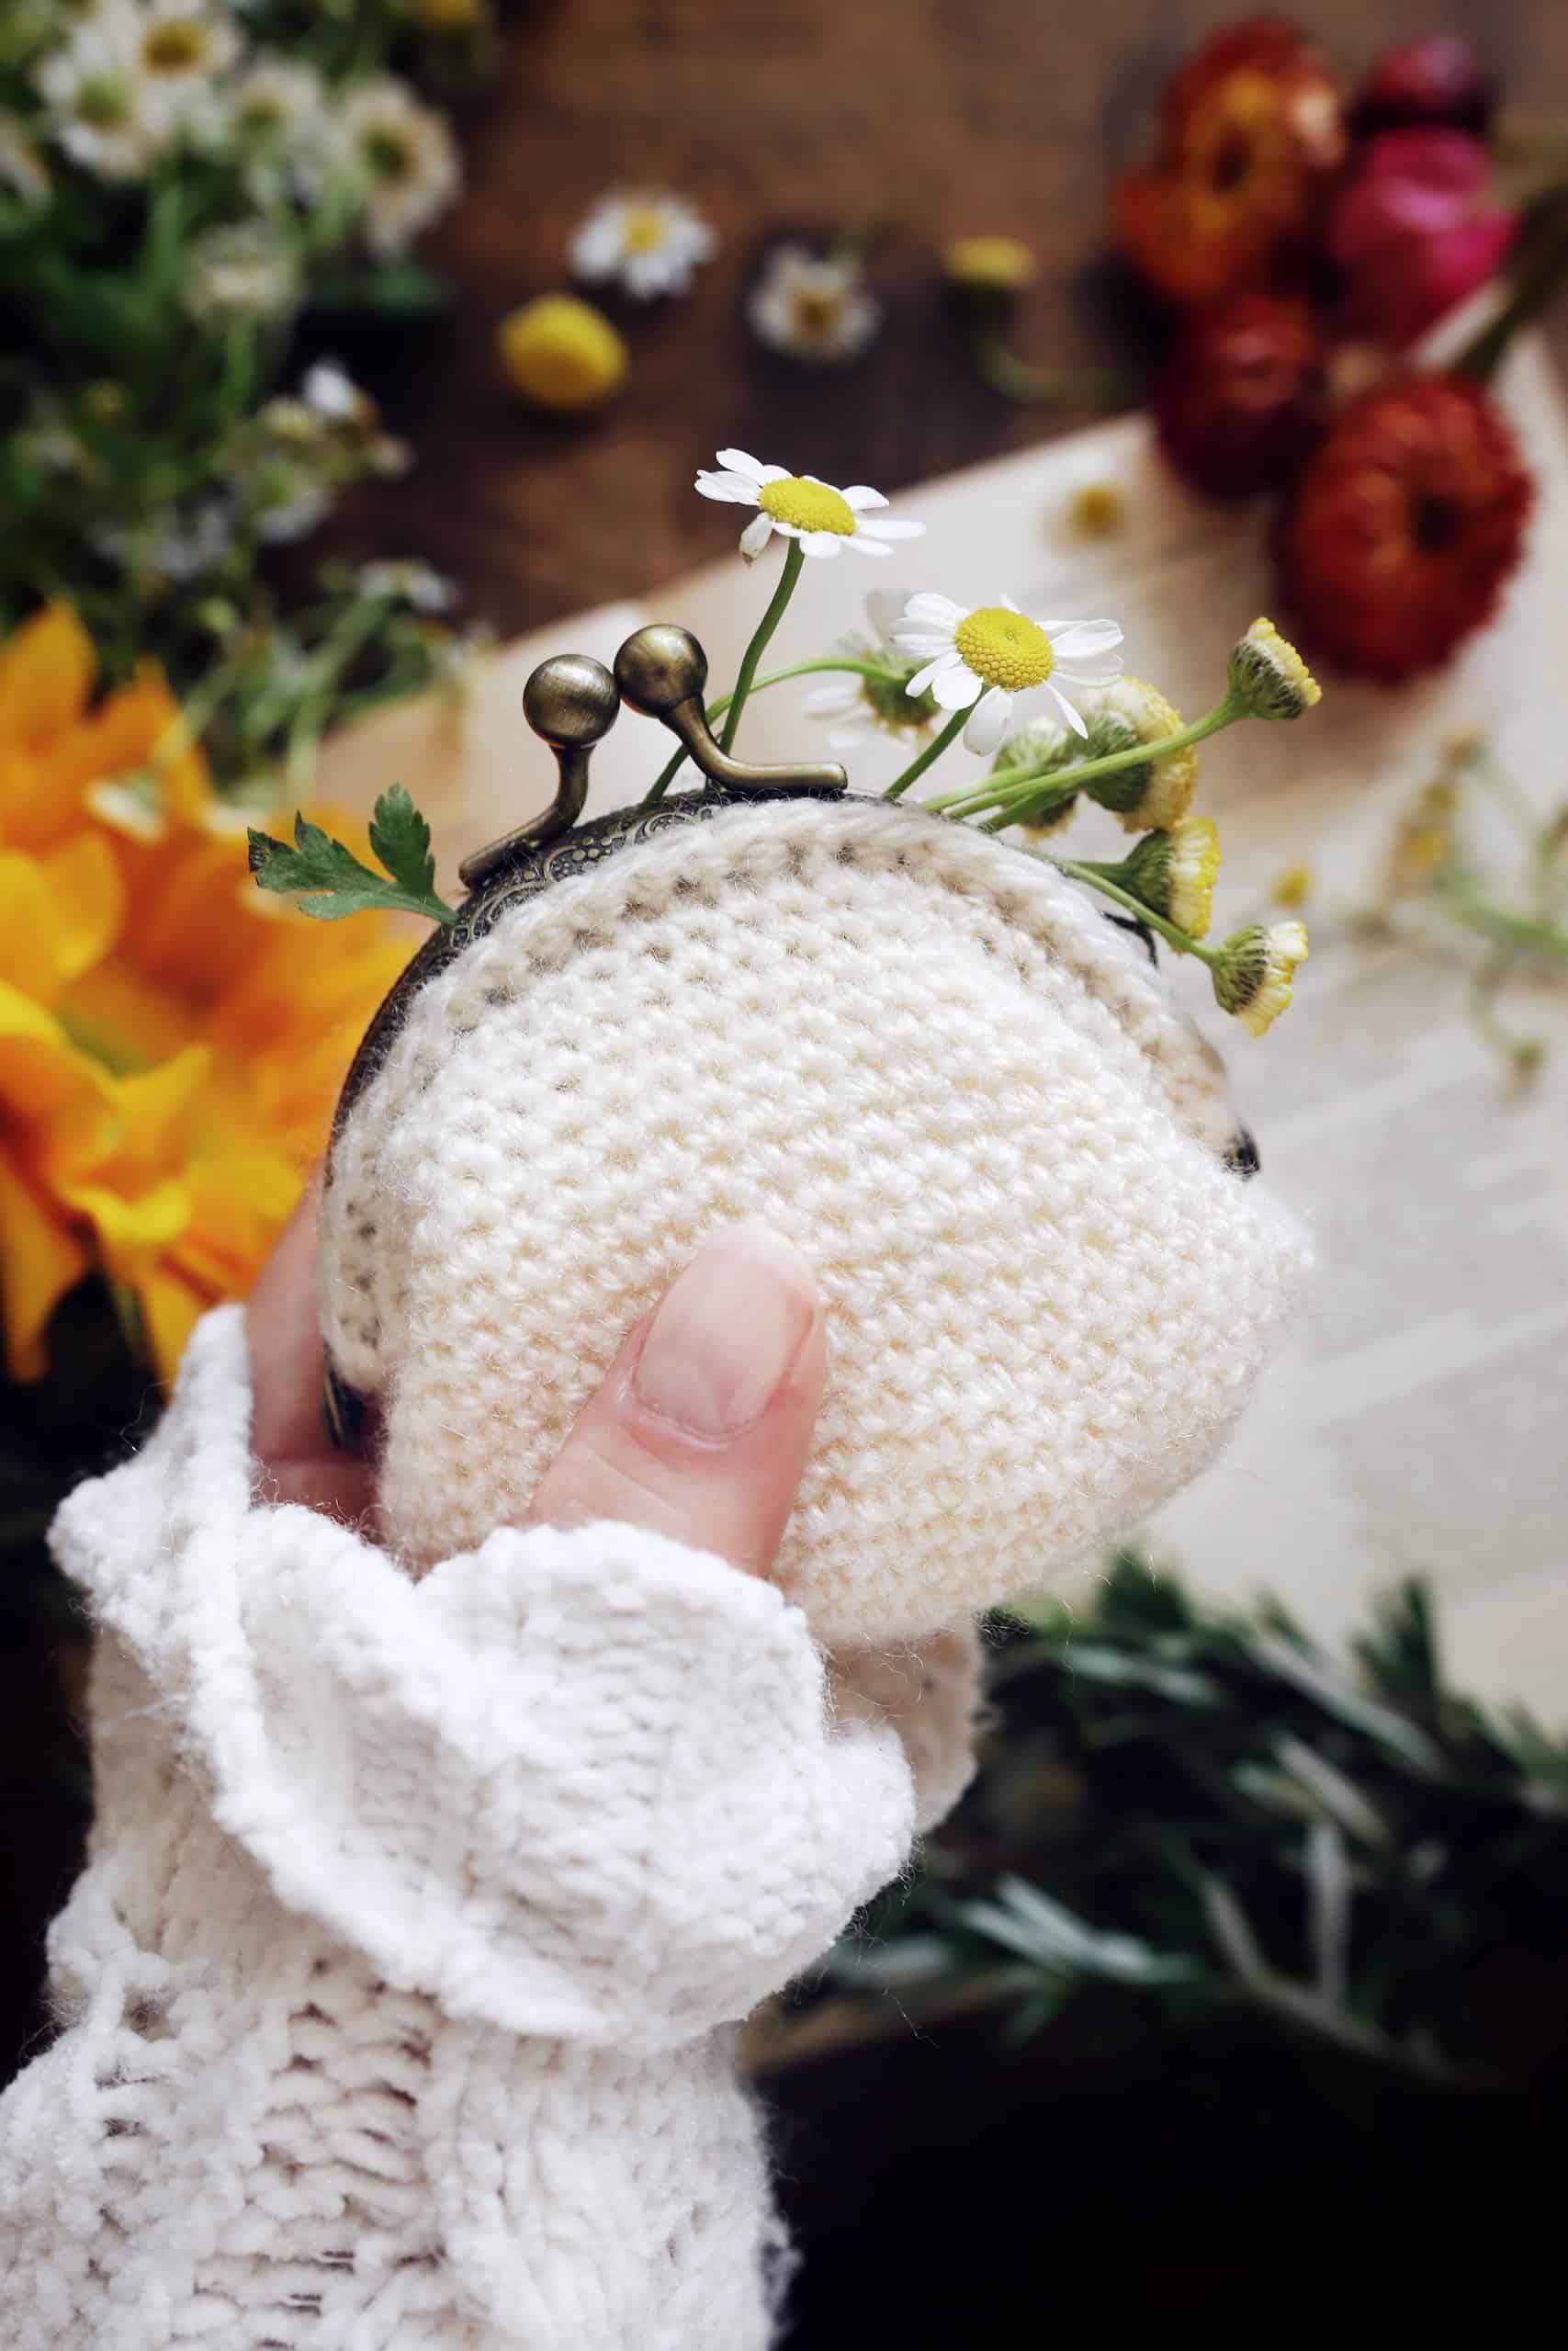 Classic Coin Purse Crochet Pattern, Darling Jadore, Vintage-Inspired